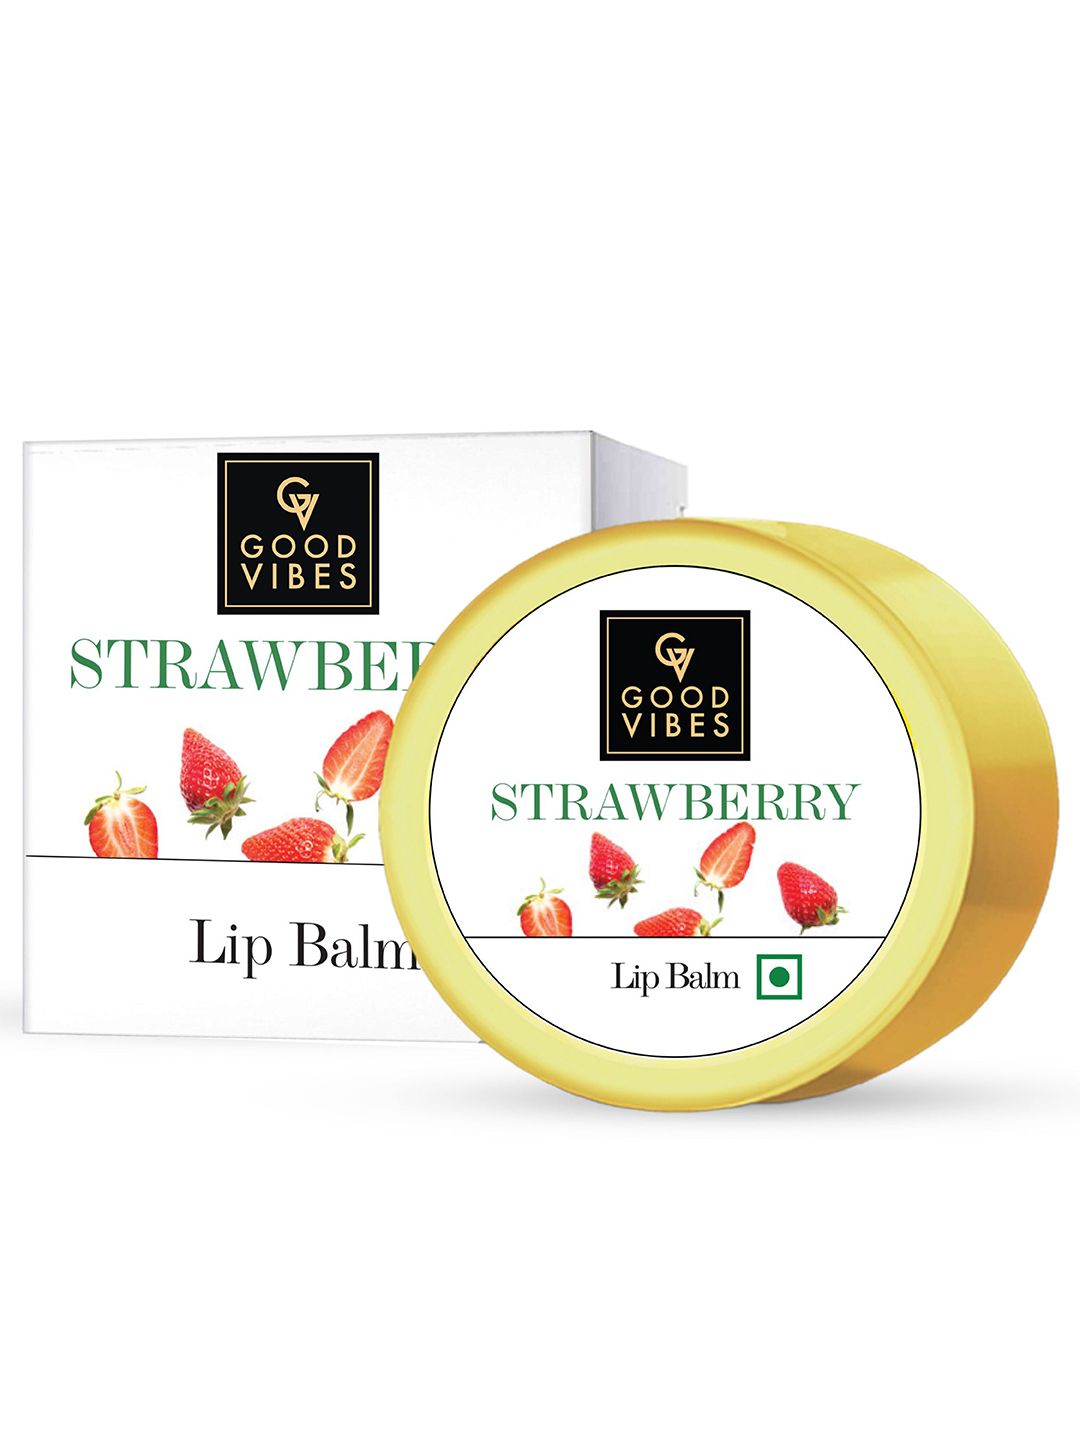 Good Vibes Strawberry Lip Balm - 8 g Price in India